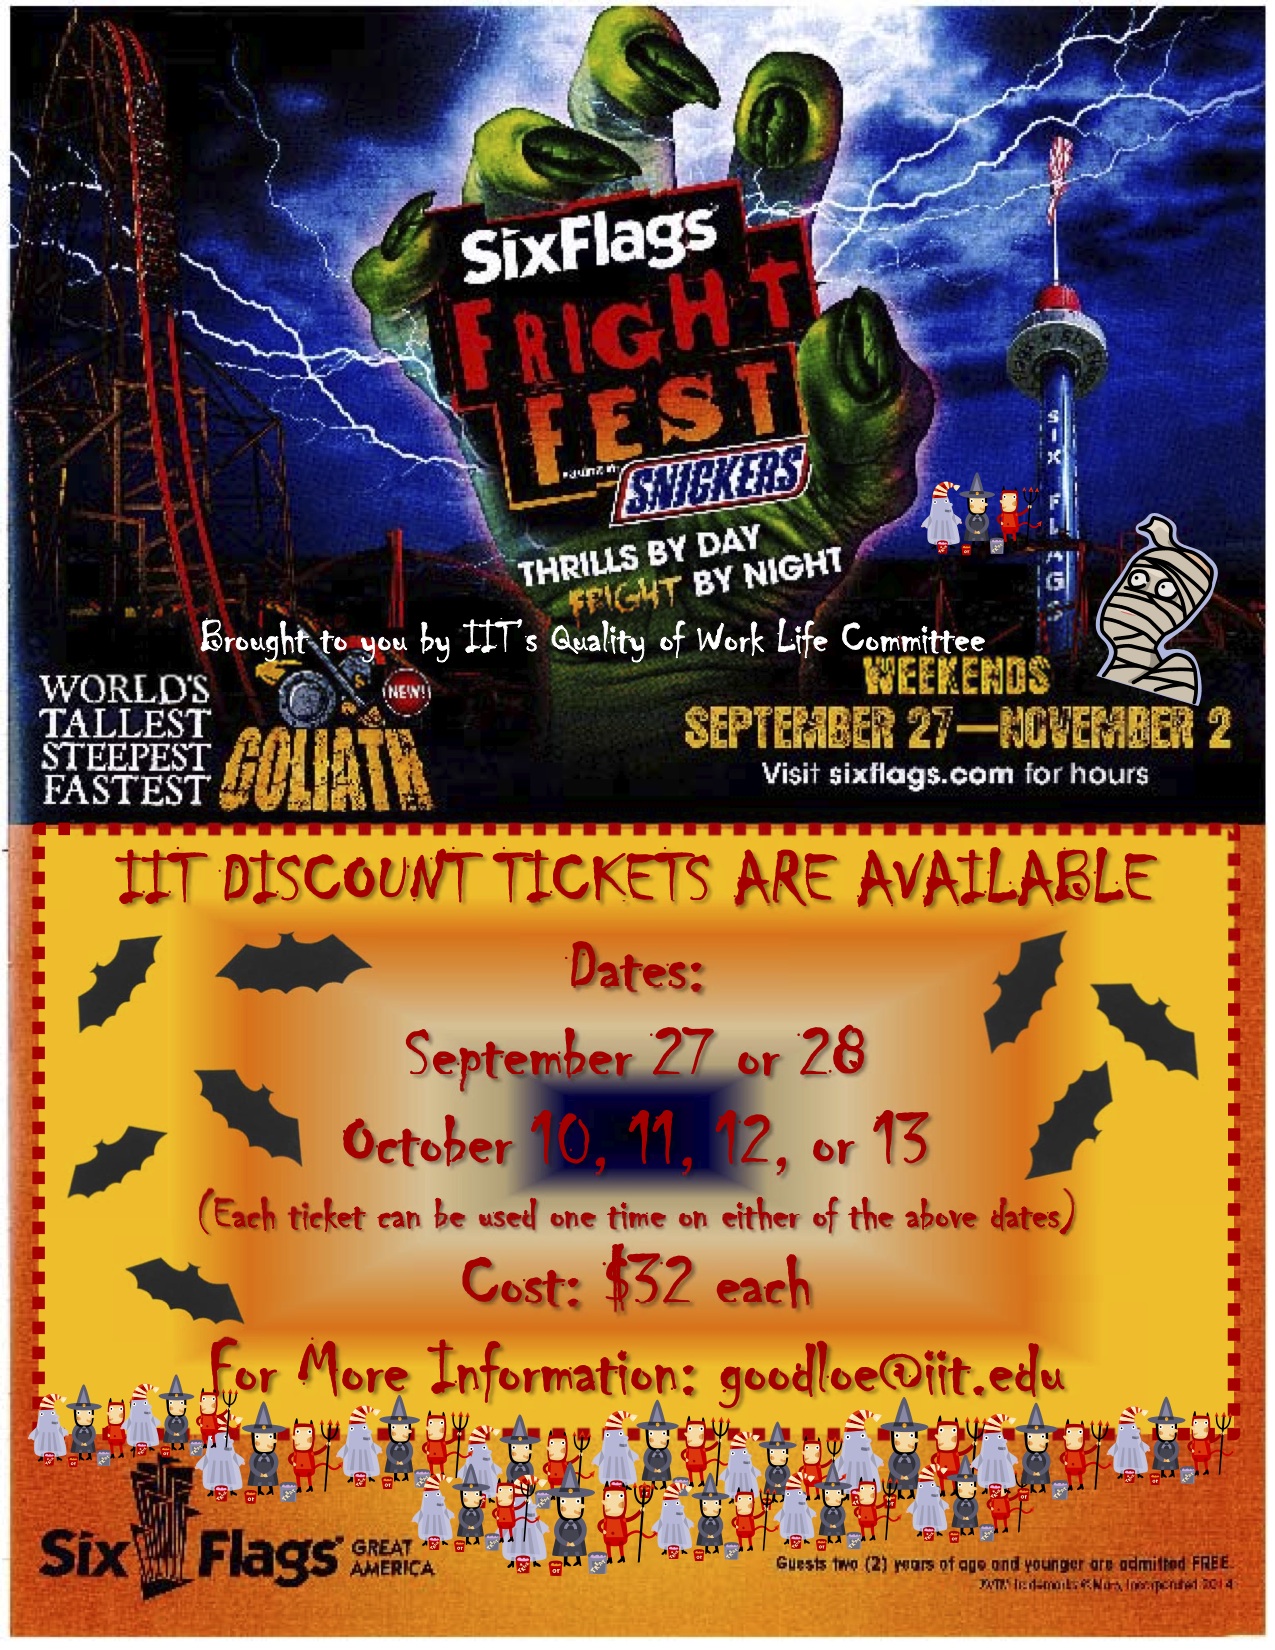 Six Flags Great America Fright Fest Tickets Are Still Available